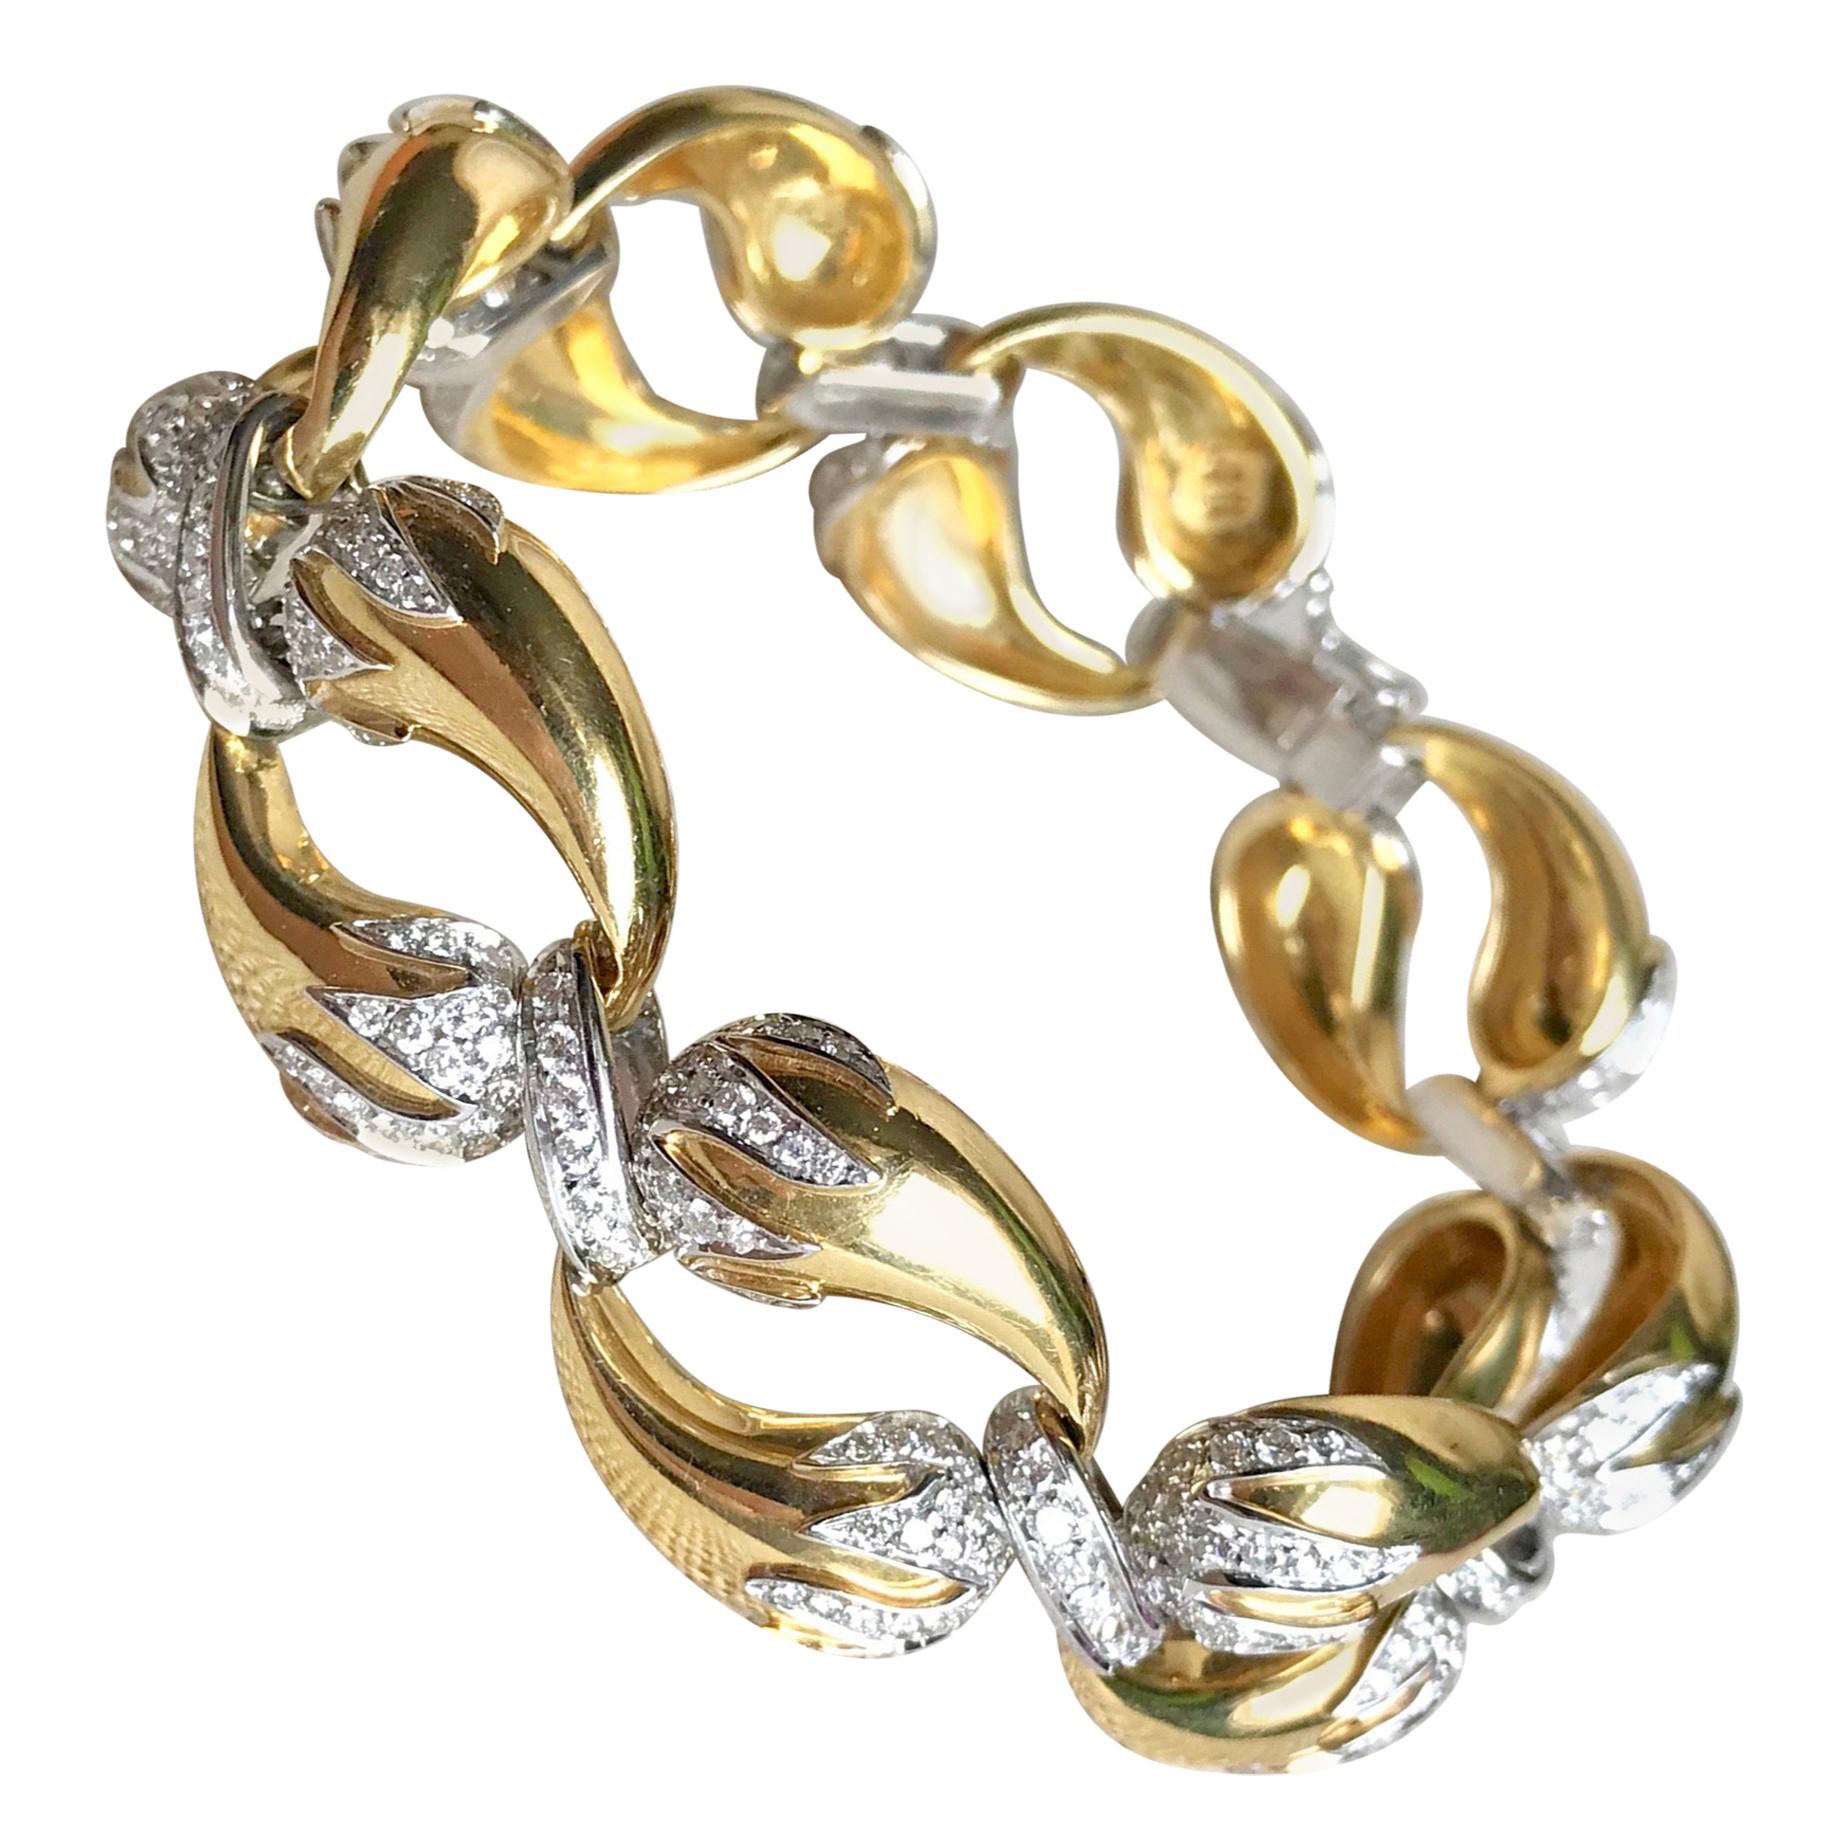 Bracelet in Yellow and White Gold 18 Carat and Diamonds circa 1960